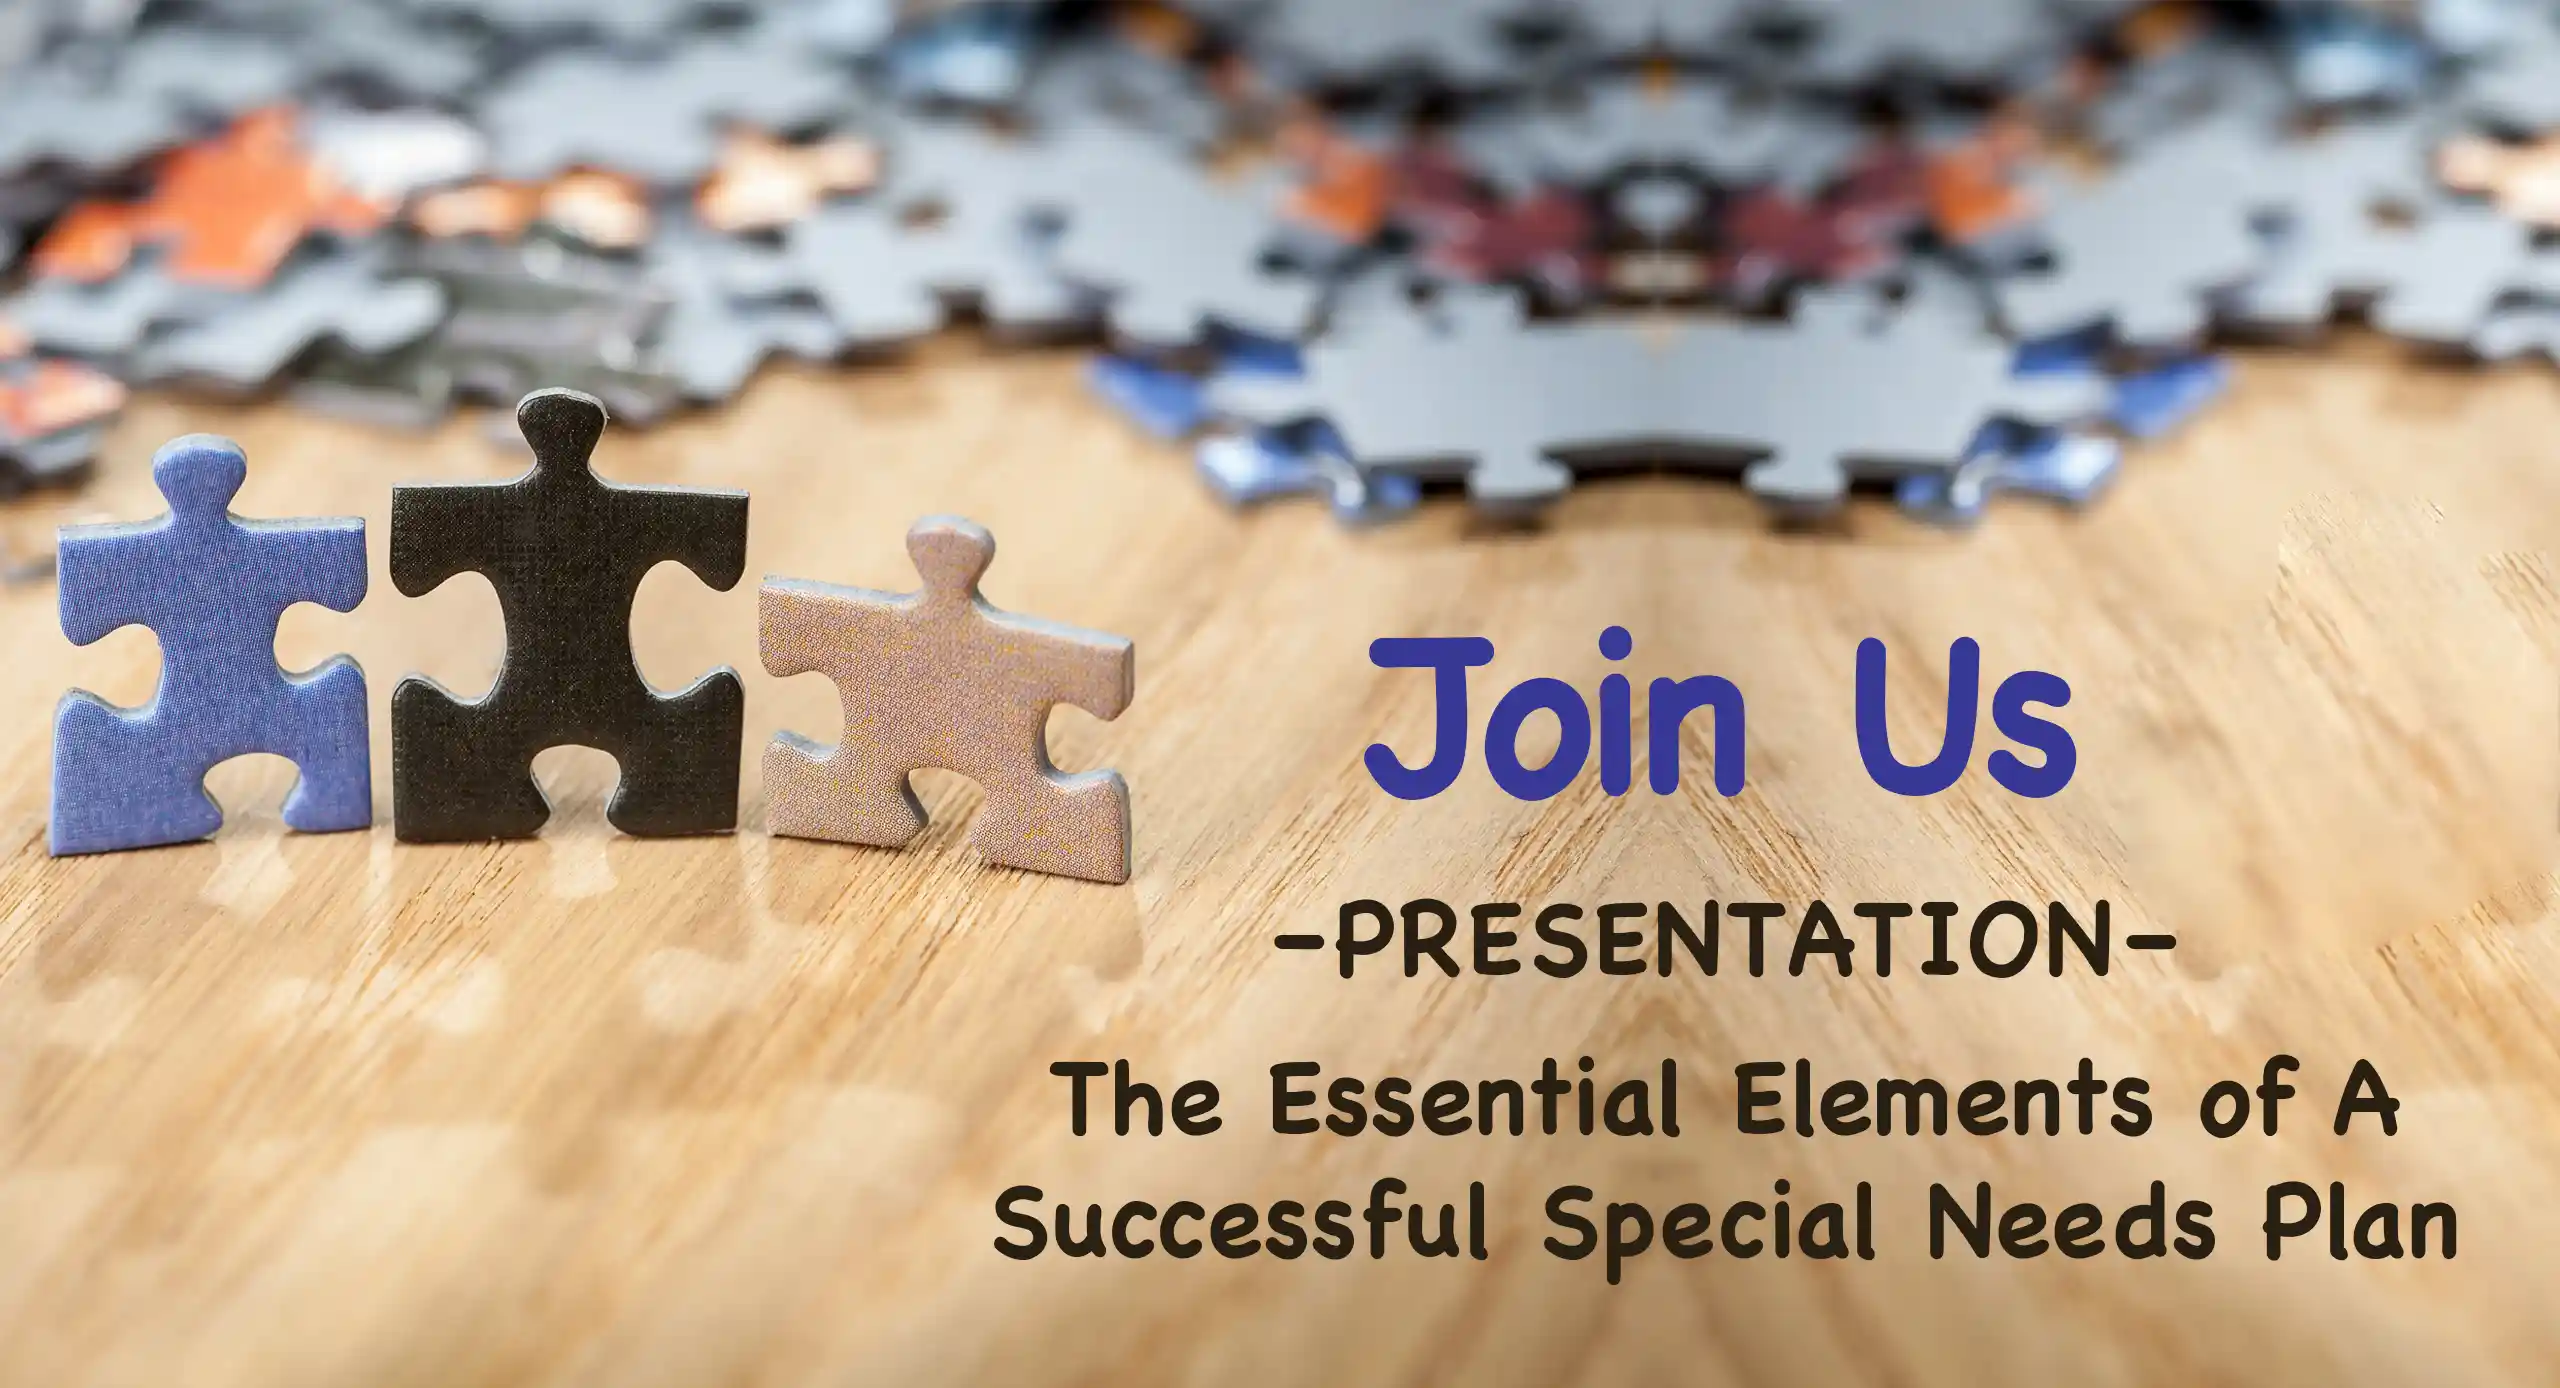 Call out banner - Join us for a Presentation on The Essential Elements of a Successful Special Needs Plan.